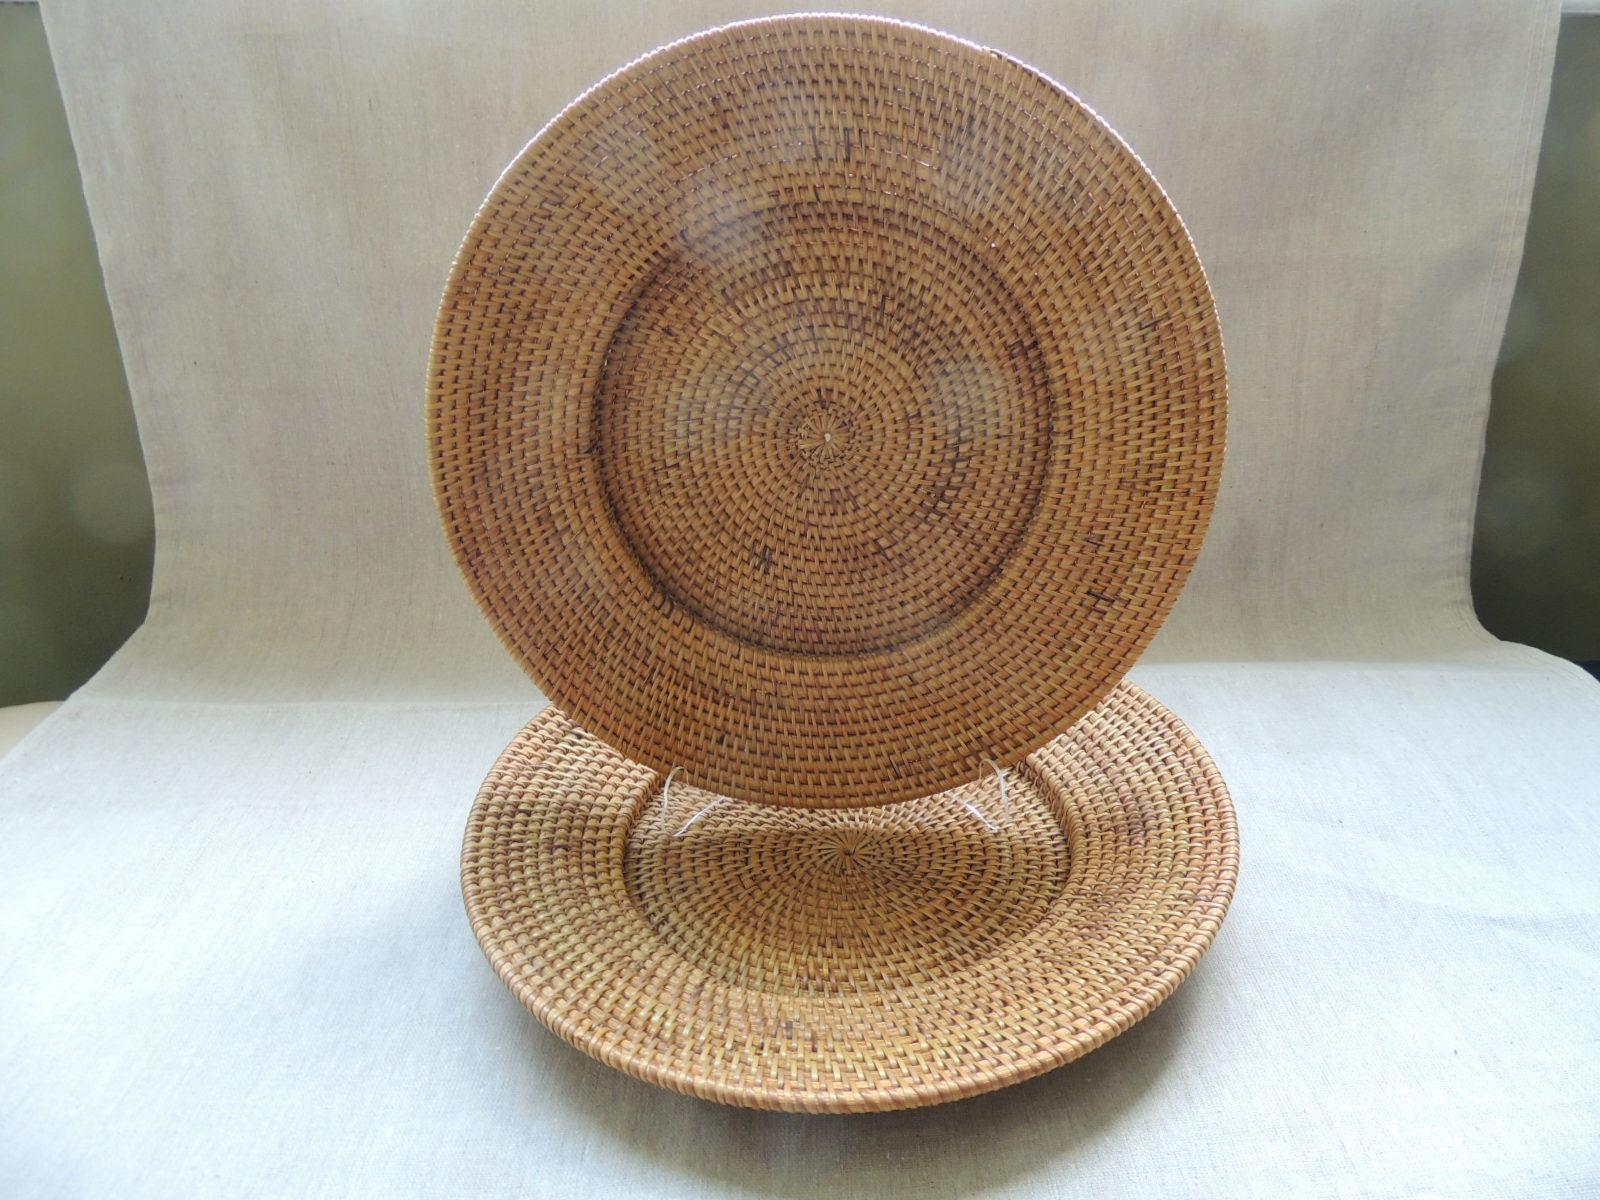 Set of (6) large deep dish rattan woven plate chargers.
Size: 15